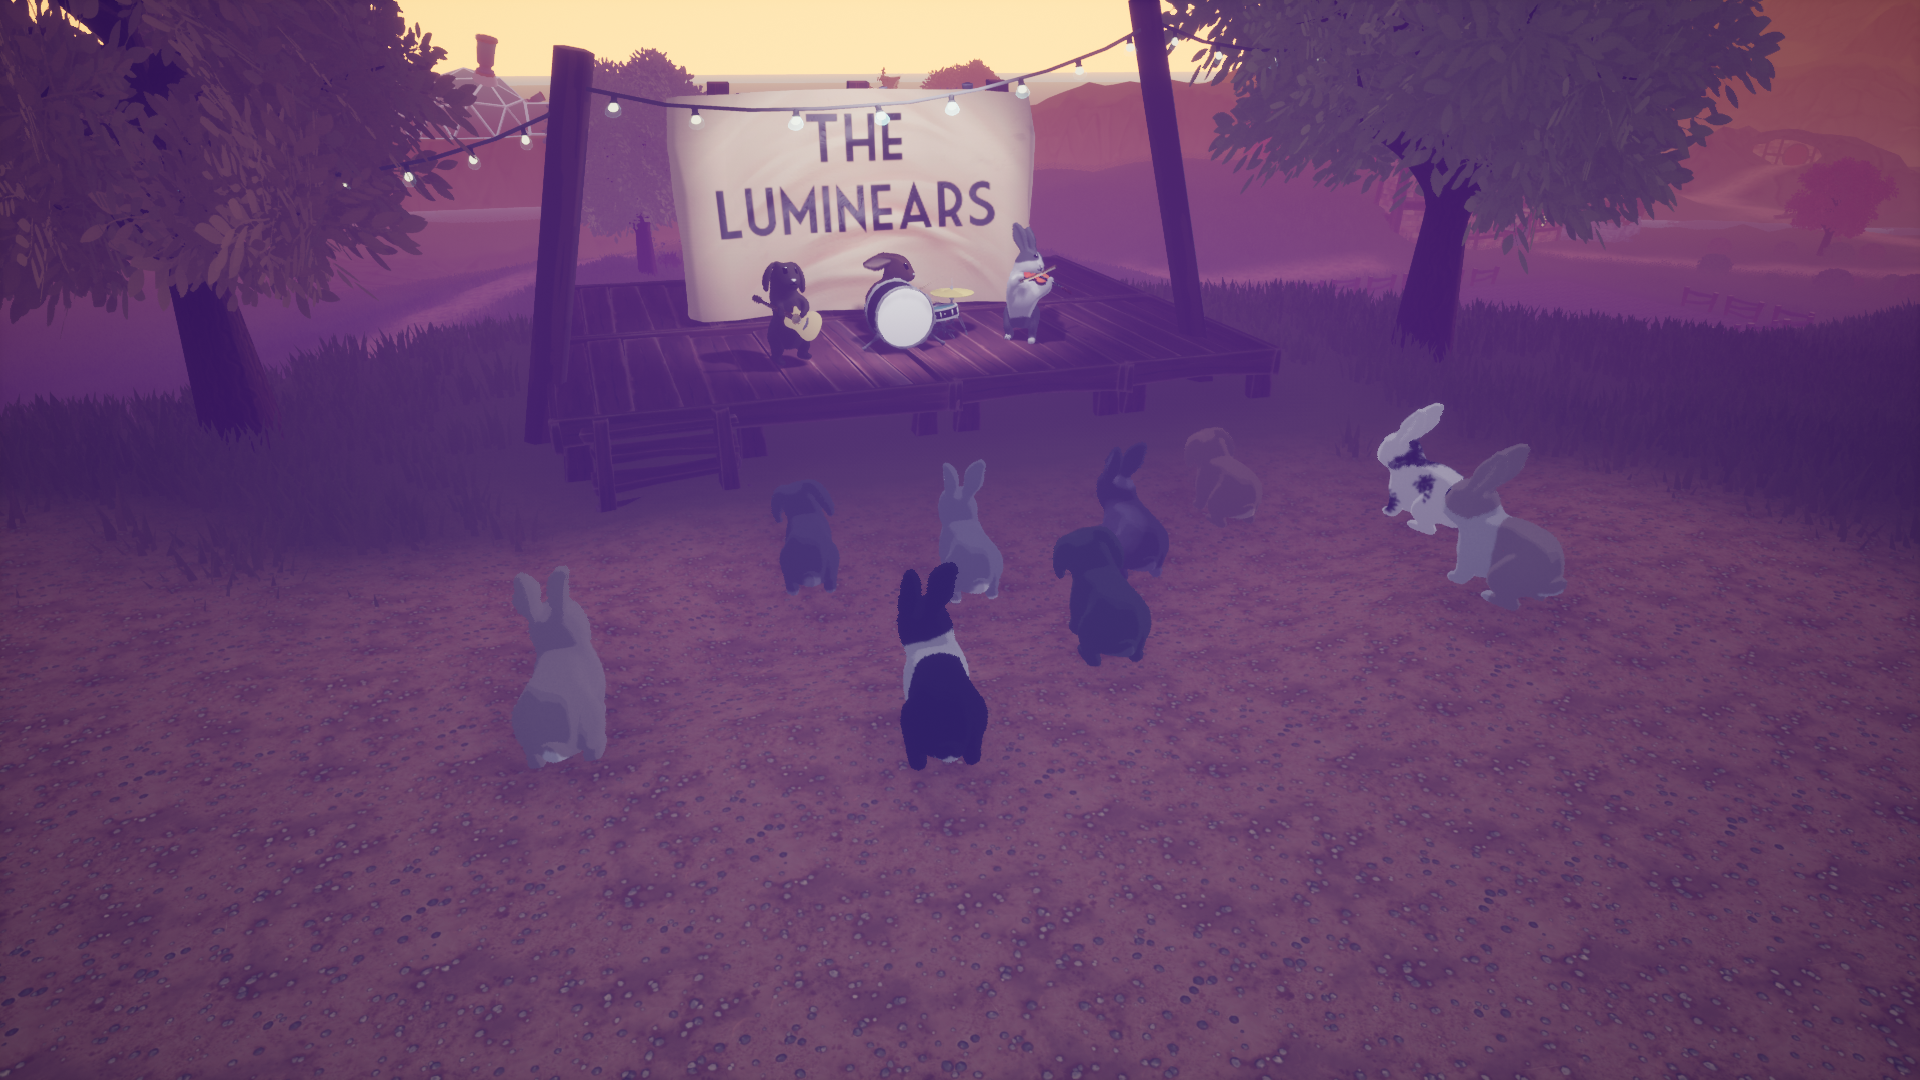 Screenshot from the game. Bunnies watch a bunny band called The Luminears.